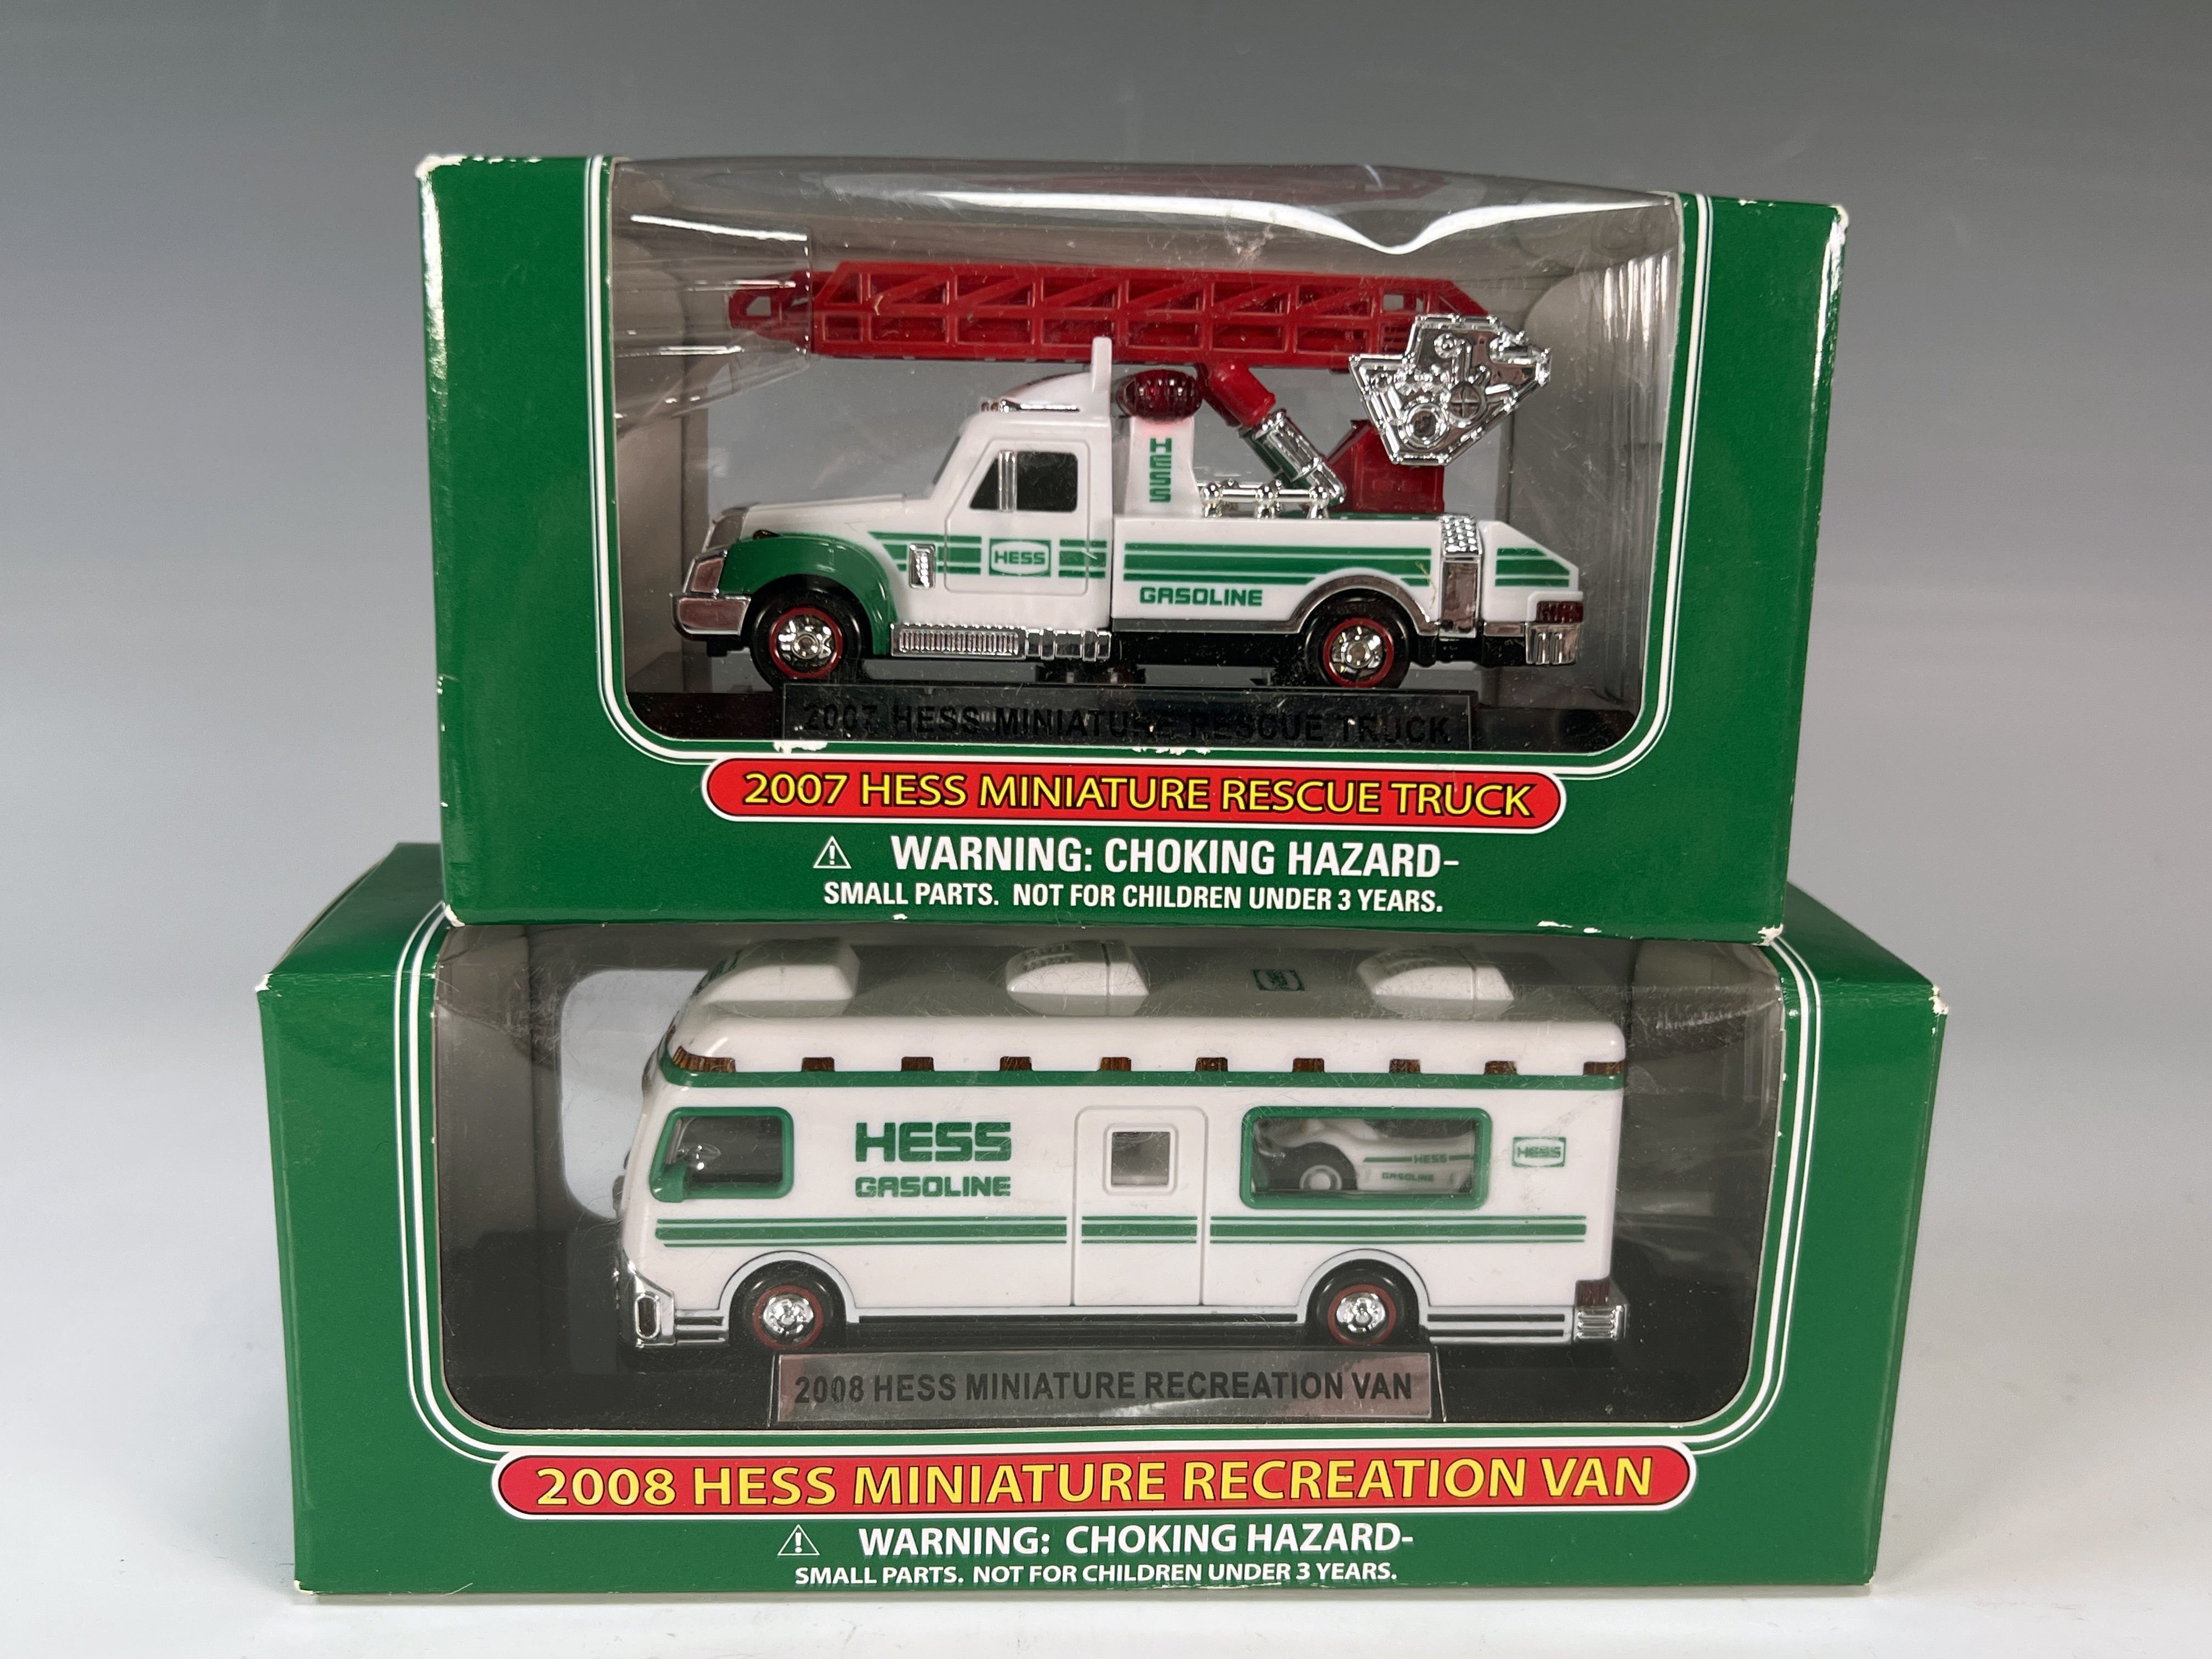 Hess Miniature Trucks And Die Cast Ford Banks image 2